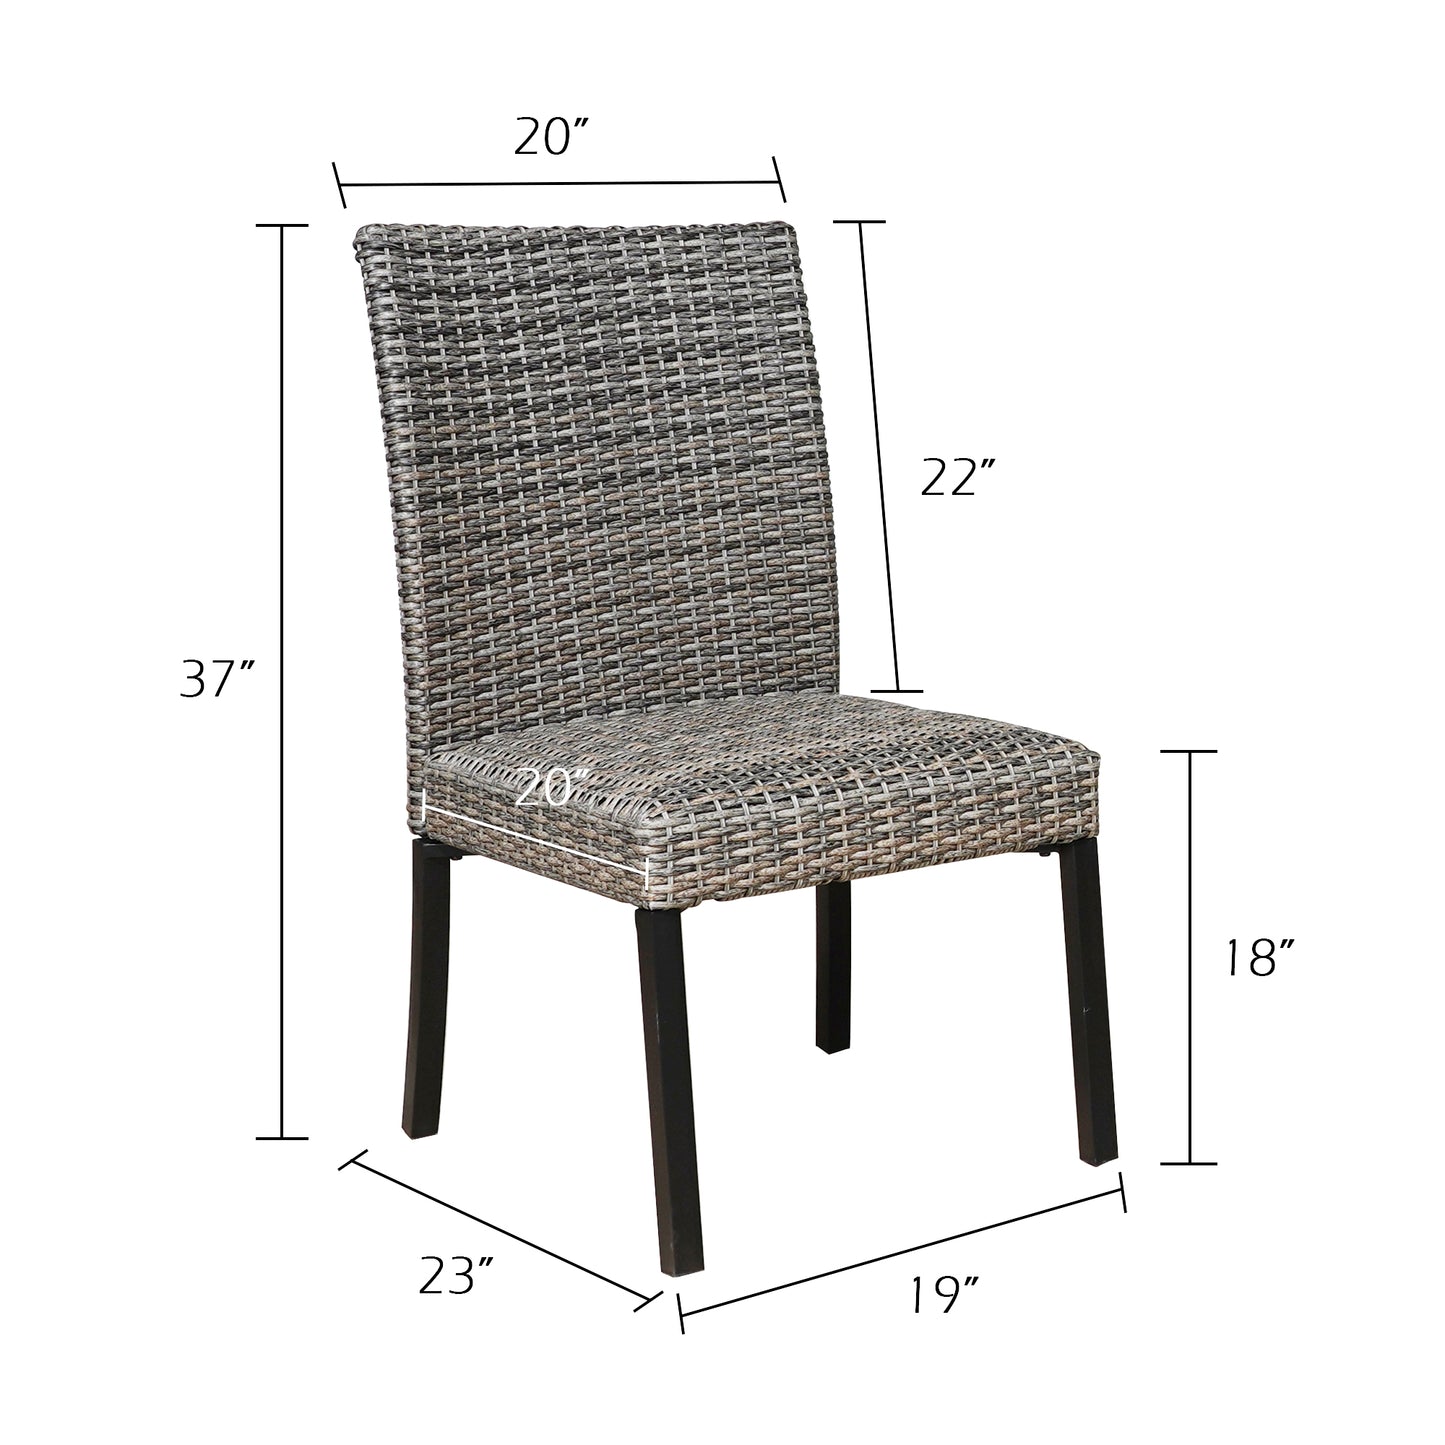 Patio Wicker Dining Chairs Outdoor Heavy-Duty Steel Frame Rattan Chairs with Quick Dry Foam Filling and Curved Backrest, Set of 2